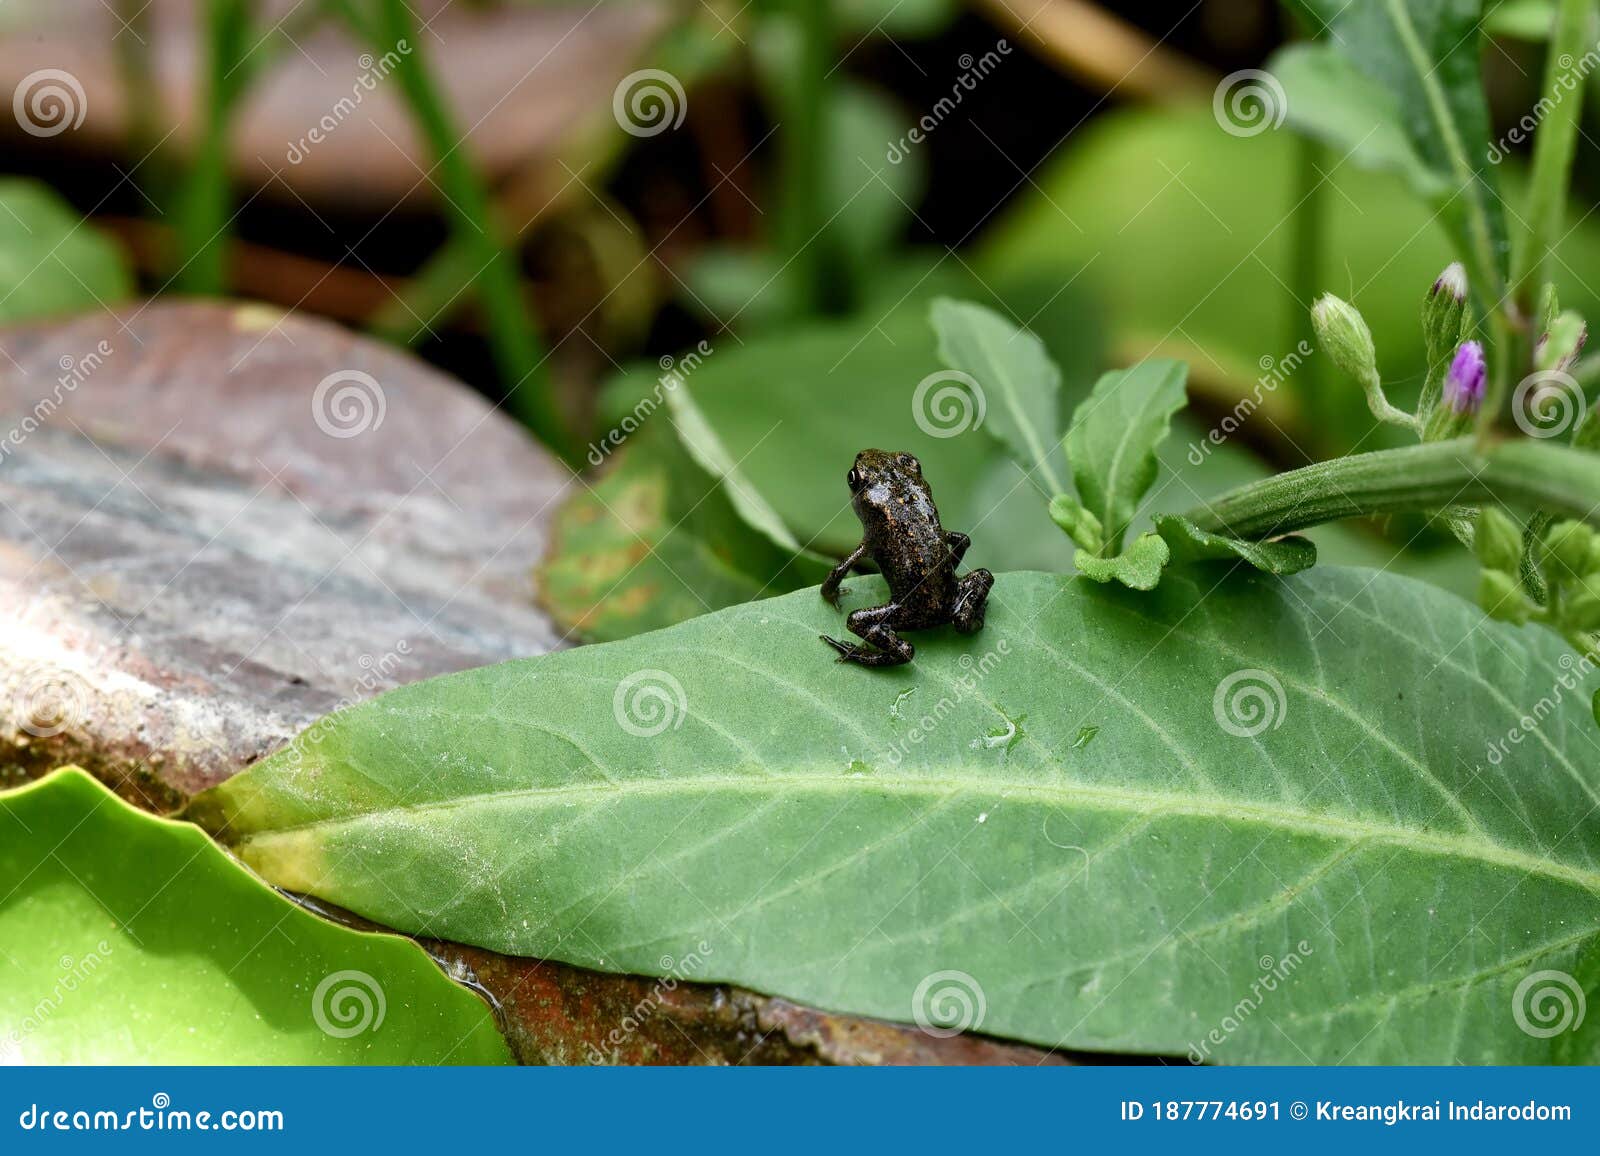 Baby Toad, Young Common Small Frog Sitting on Green Leaf Stock